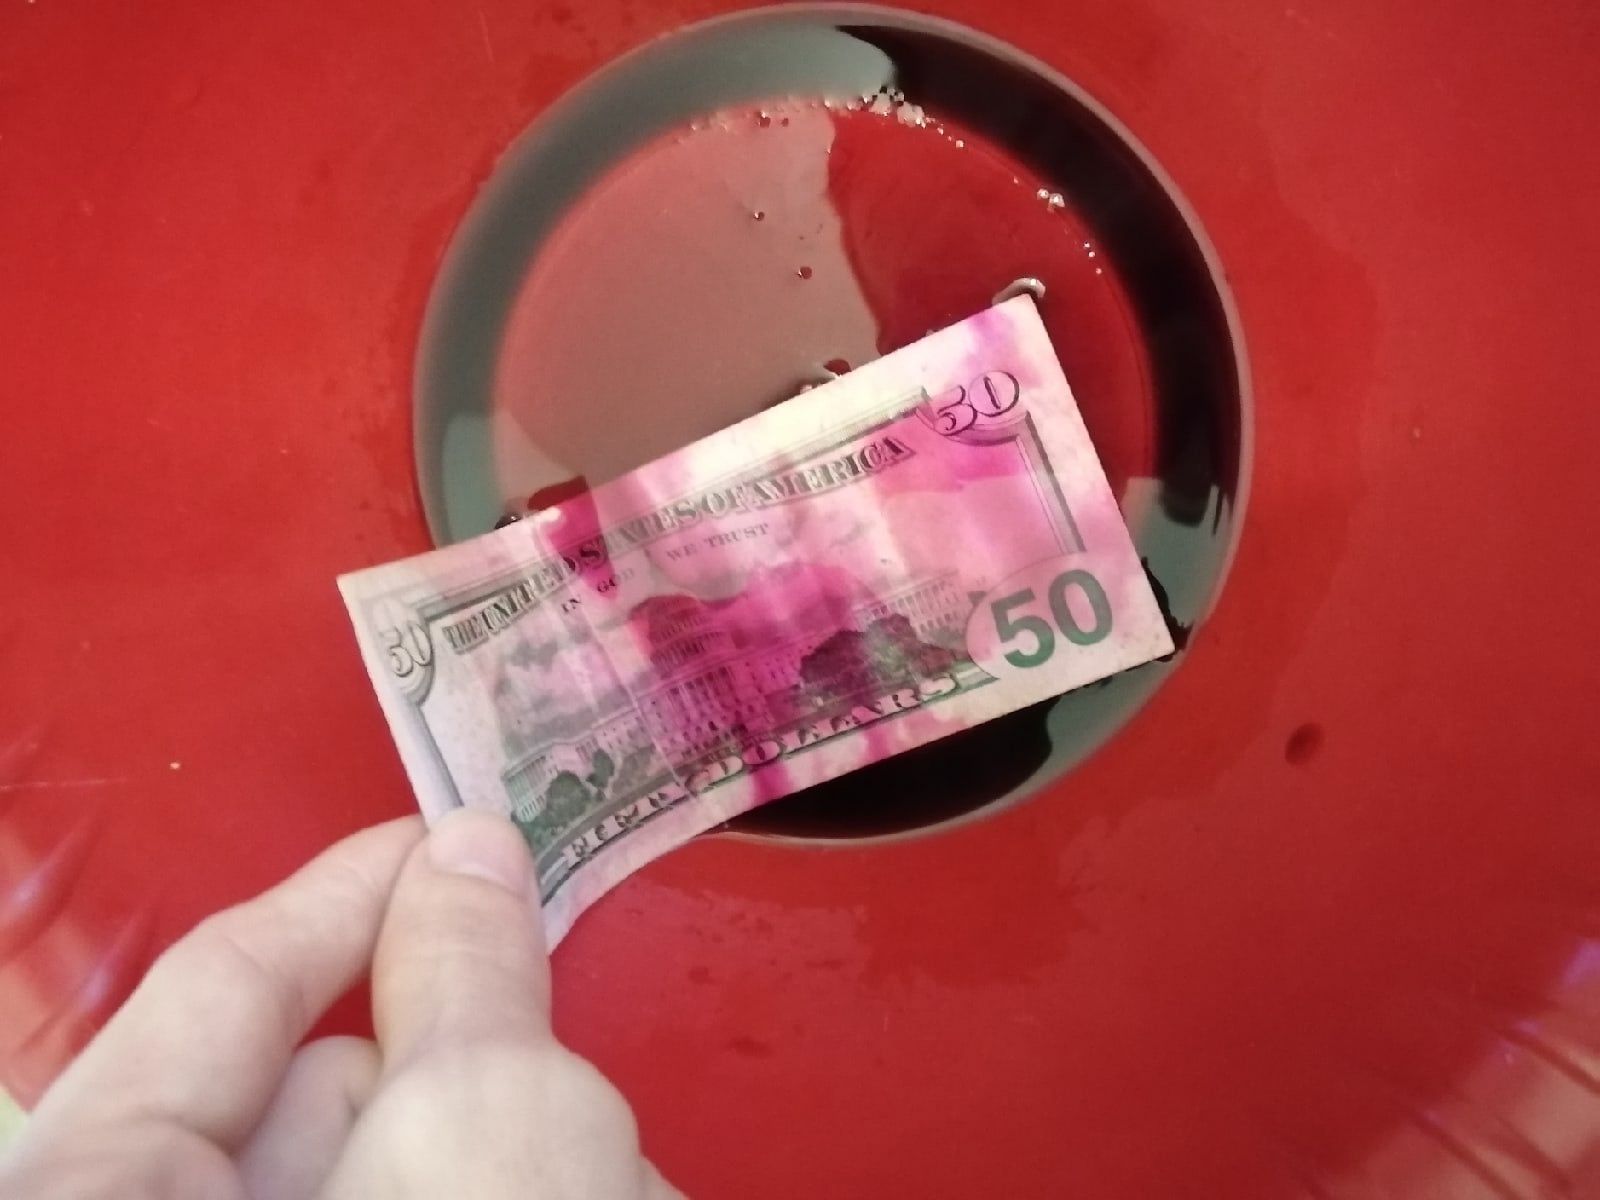 How I laundered dollars and laundered - My, Life stories, Bill, Dollars, Currency exchange, Currency, Cashier, Dollar rate, Ruble, Laundering of money, Solution, Potassium permanganate, Vinegar, Hydrogen peroxide, Zenith, Longpost